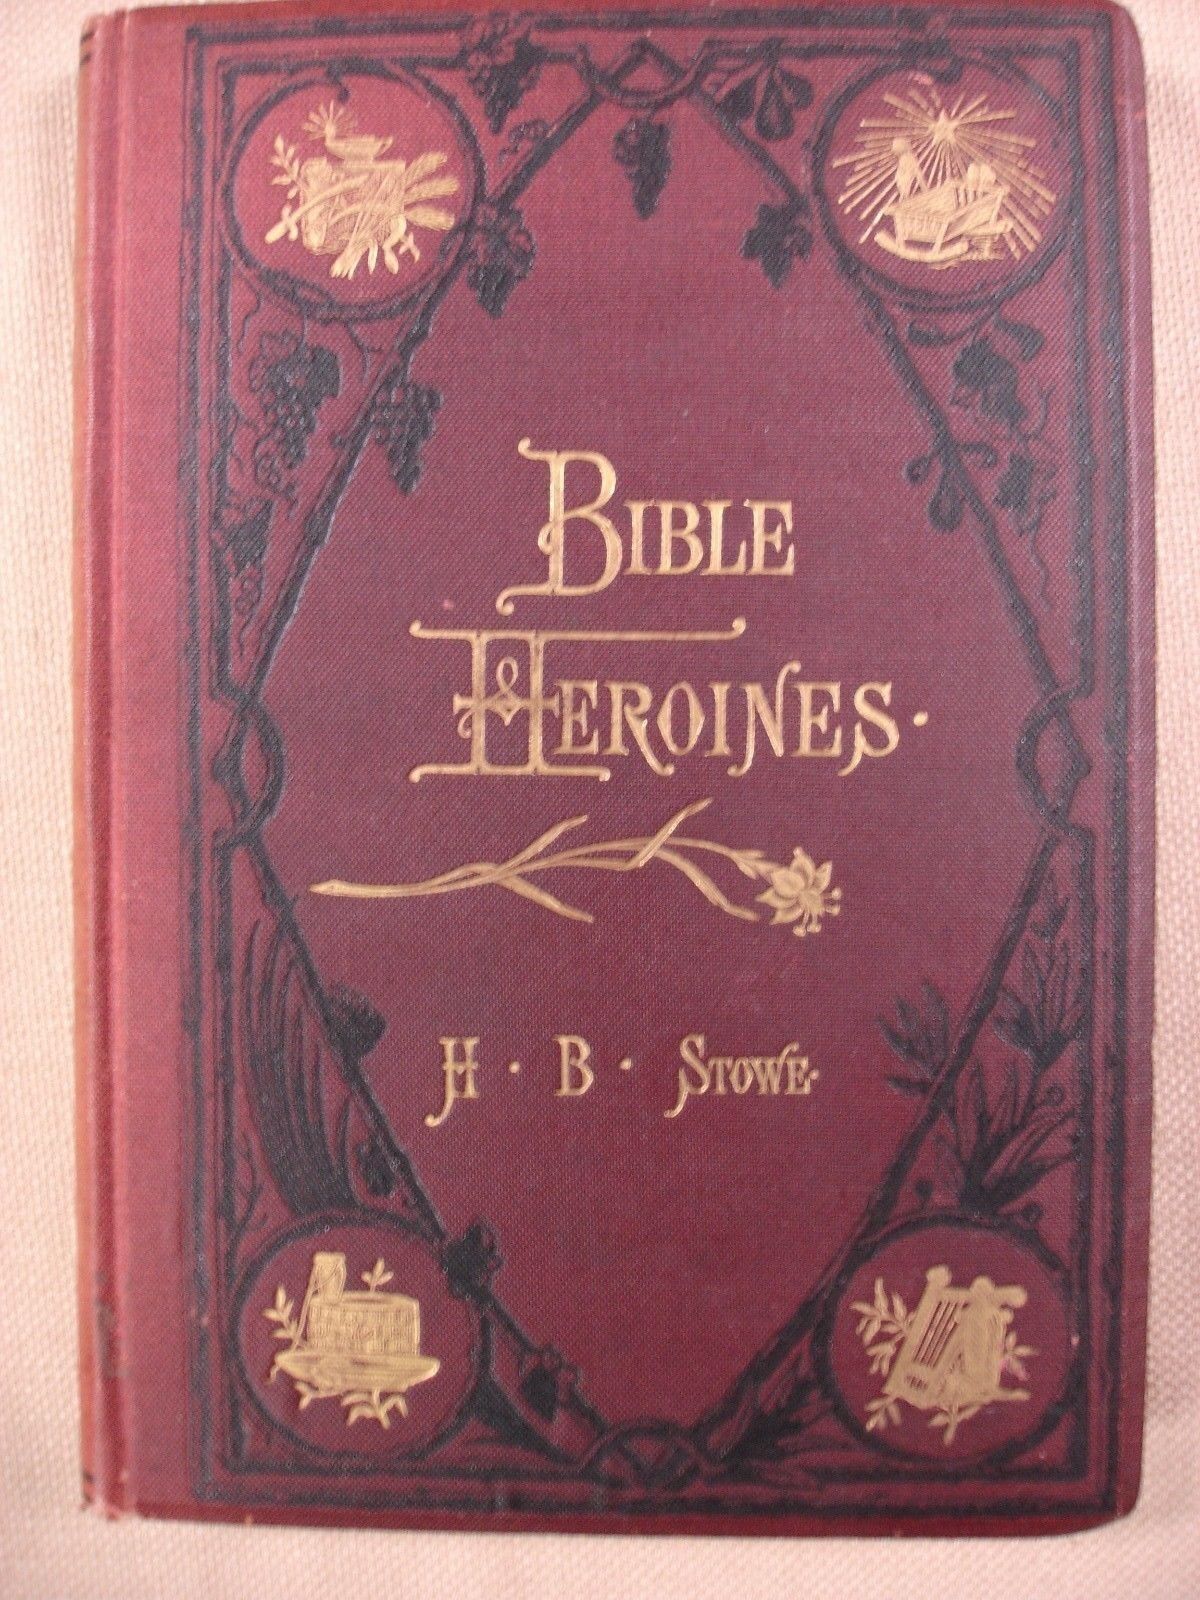 Bible Heroines by H. B. Stowe 1878 - FBHP-4